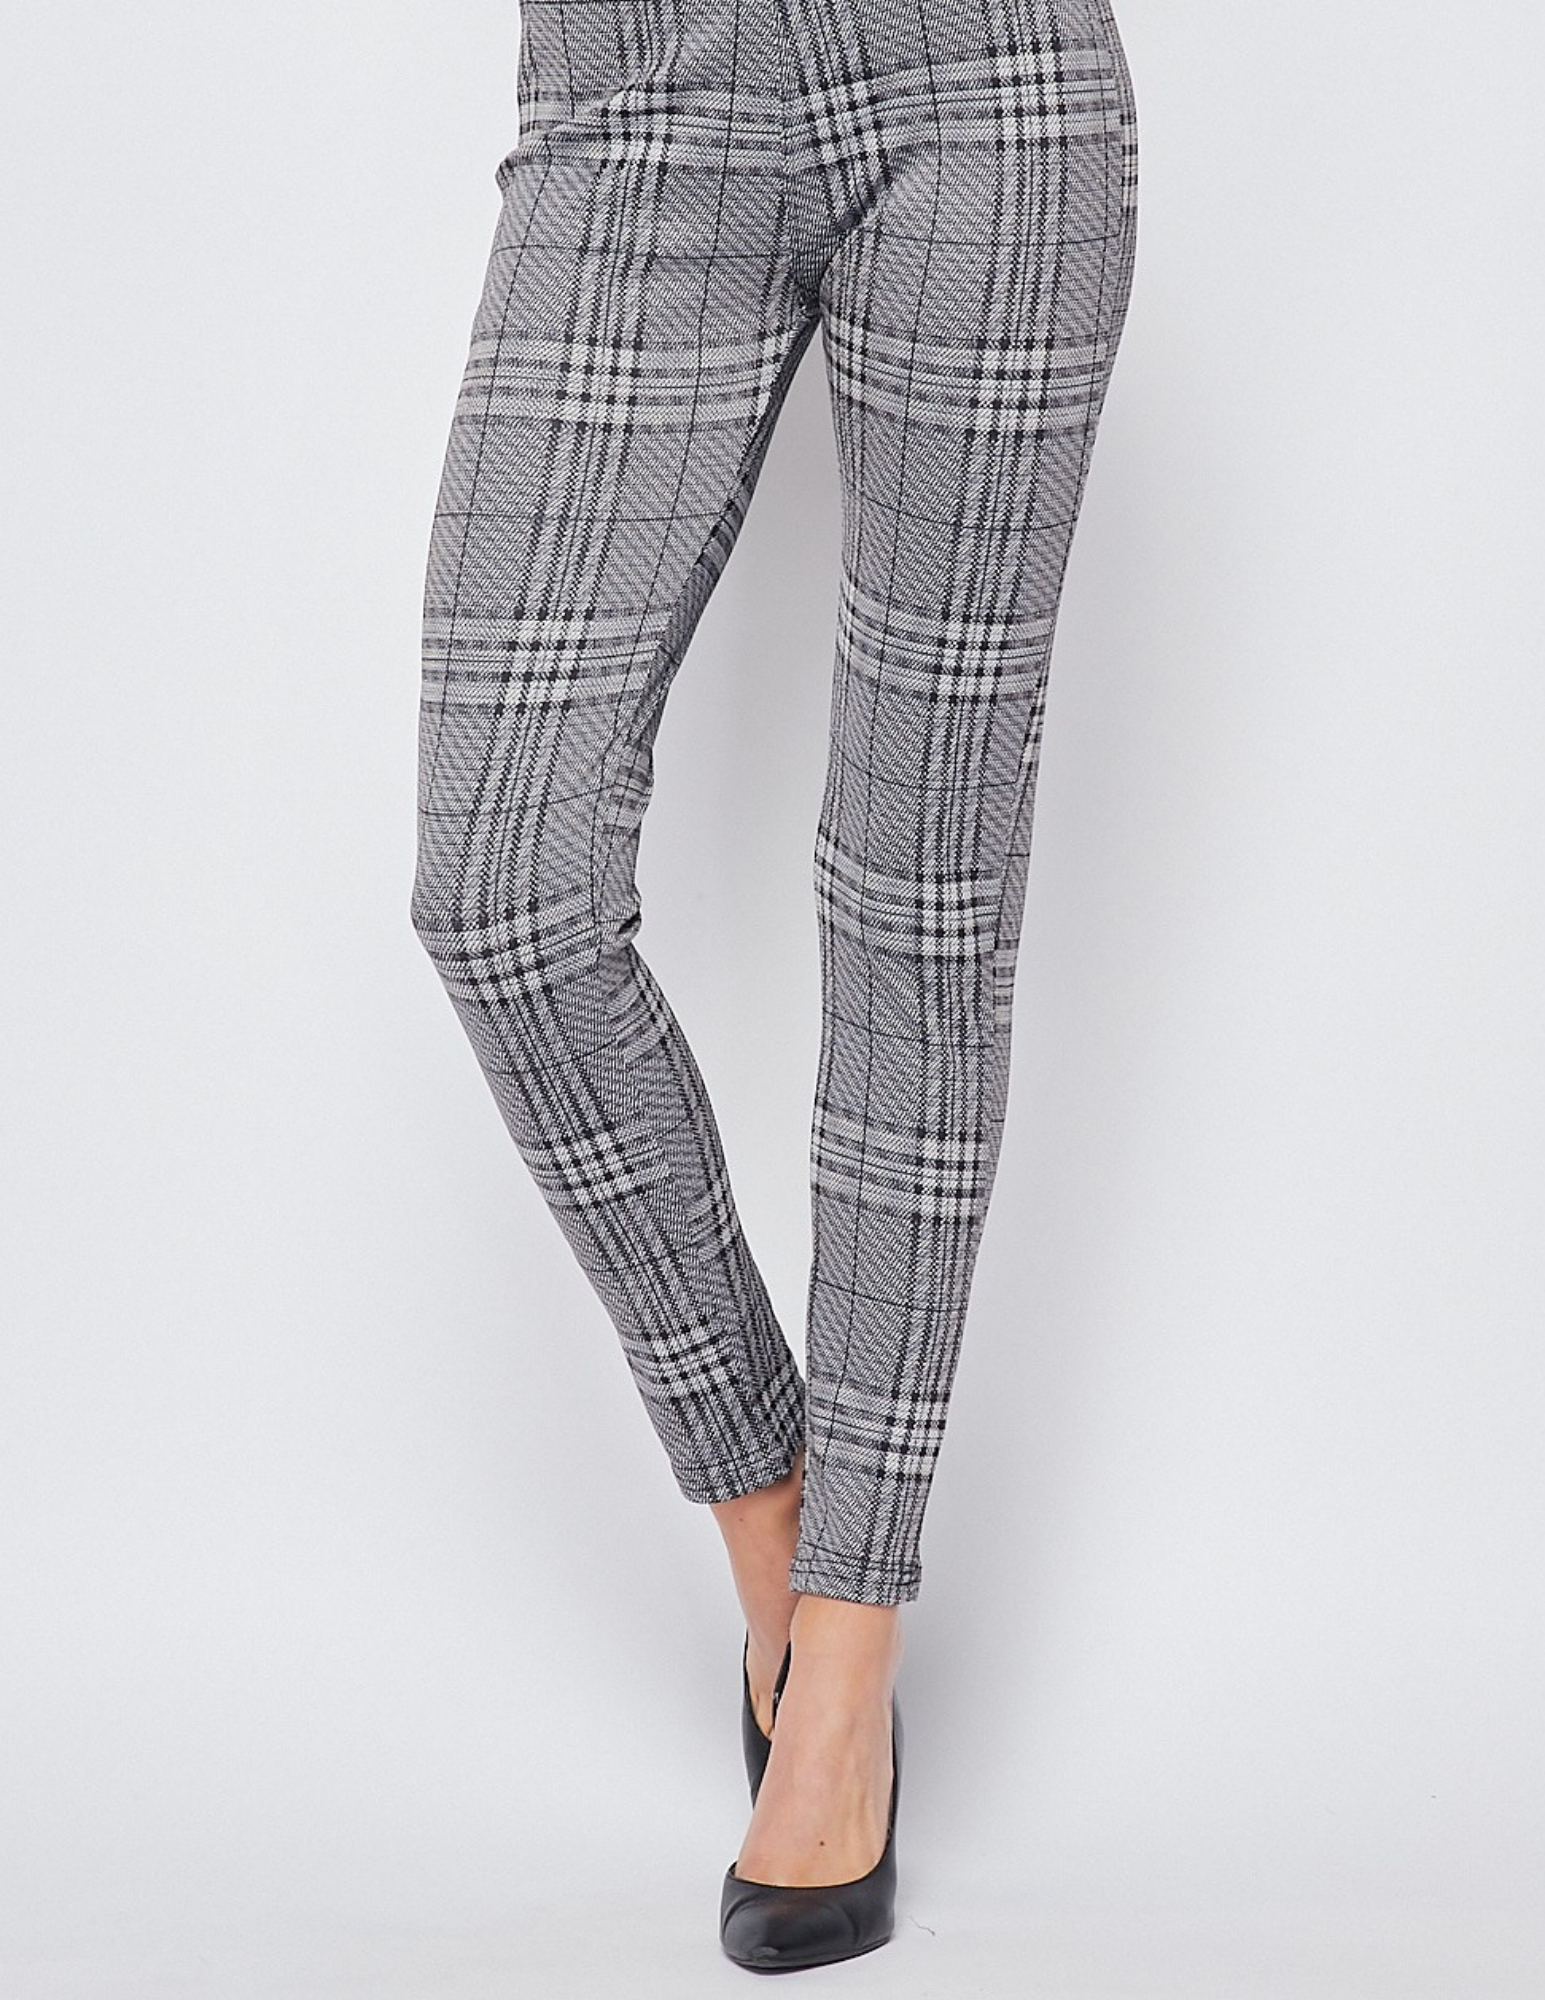 Two ways I am Wearing my Plaid Pants this Christmas! - Em by the Sea